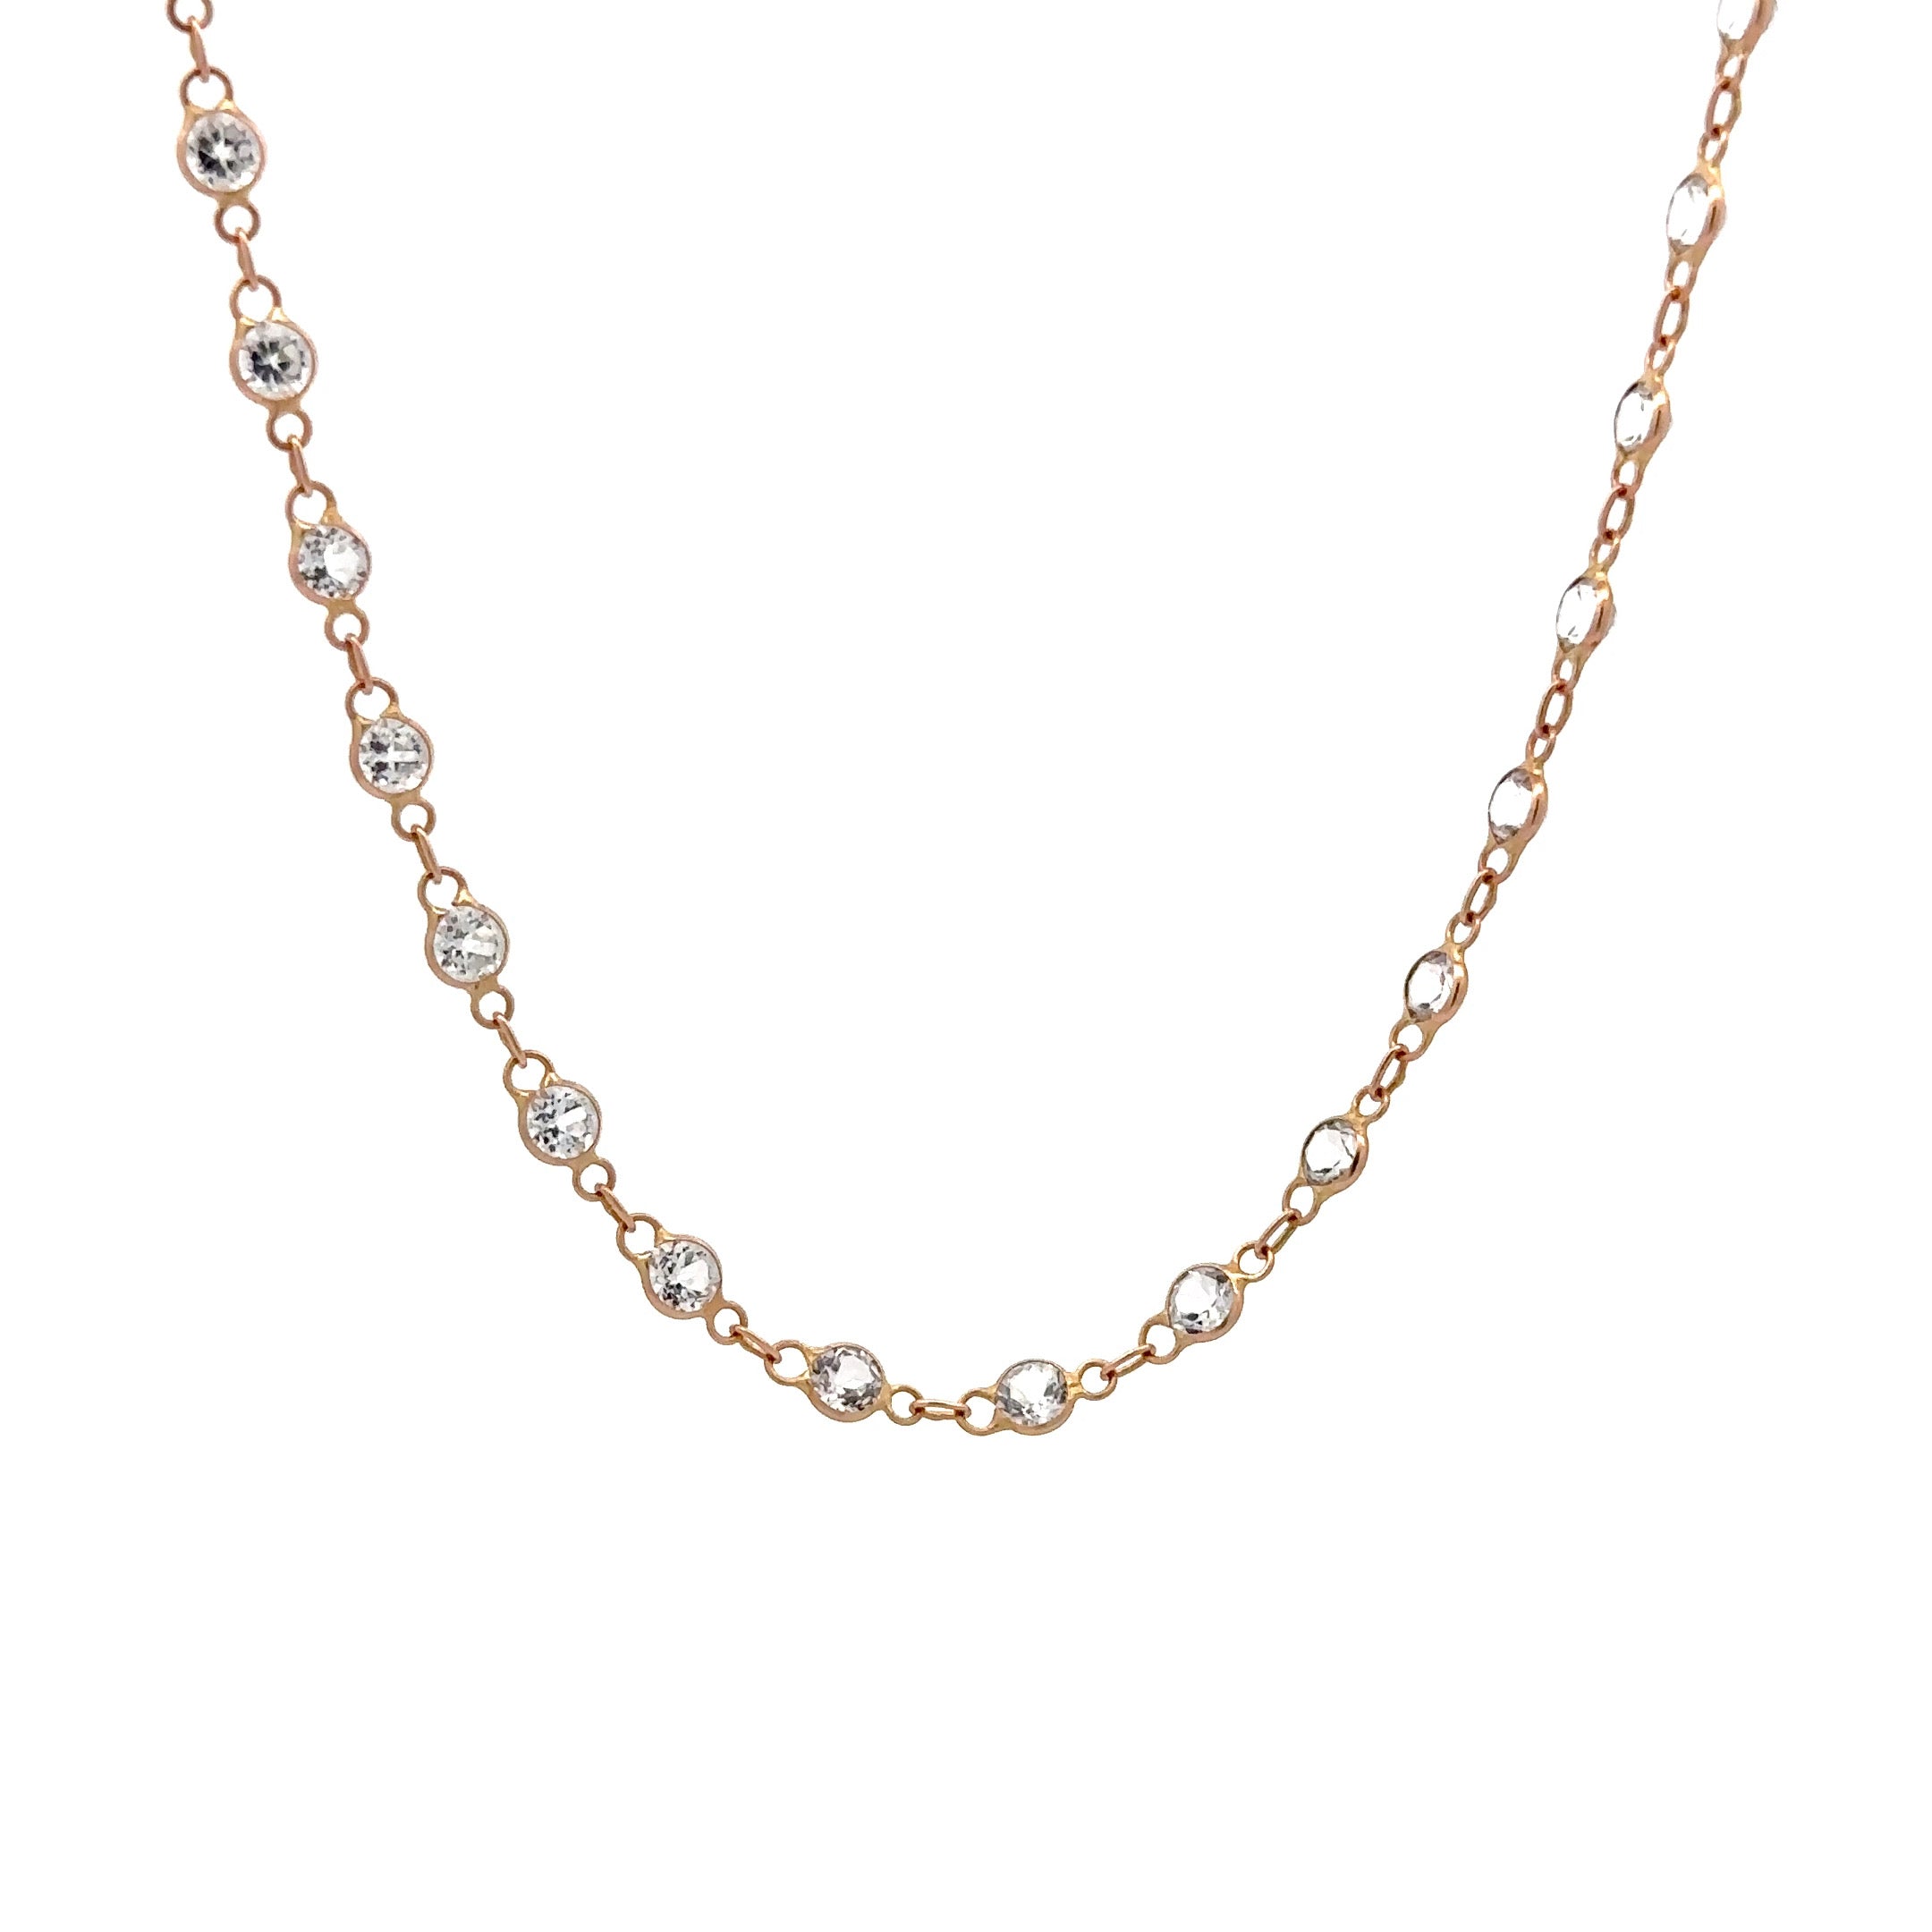 WD598 14kt Gold with White Topaz by the Yard Necklace